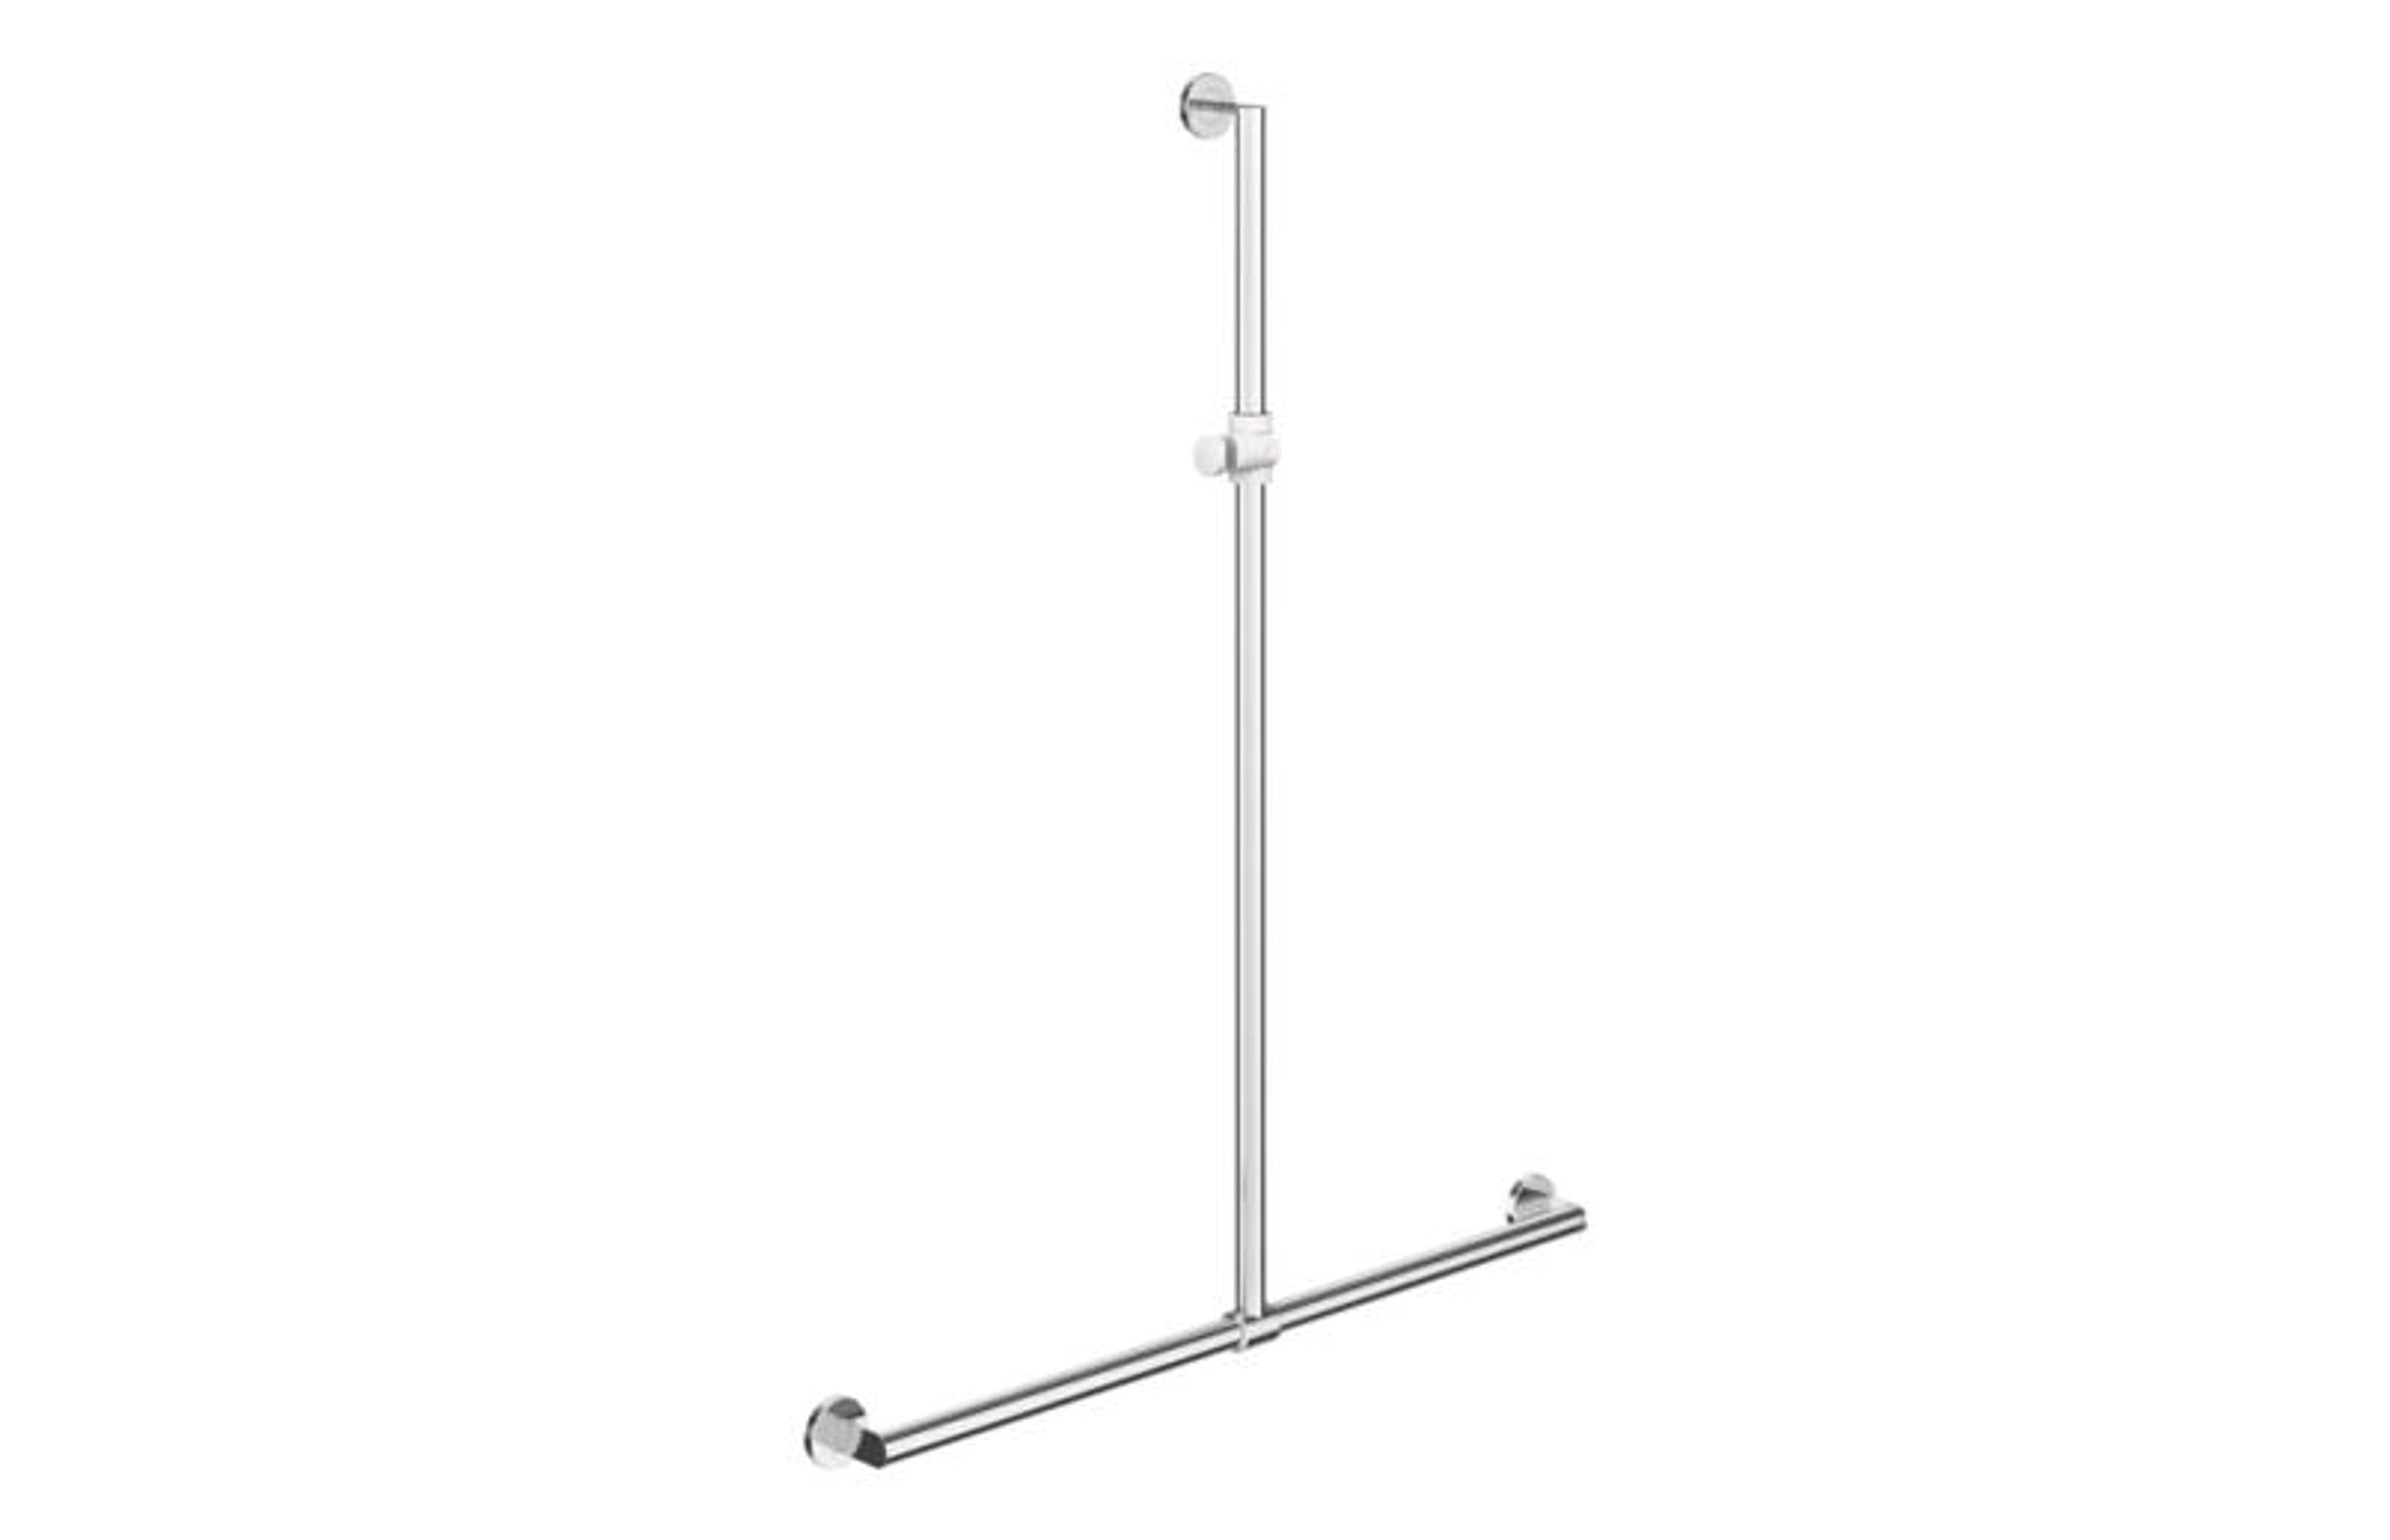 Hewi System 900 T Shower Rail in Brushed stainless steel (900.35.401XA)